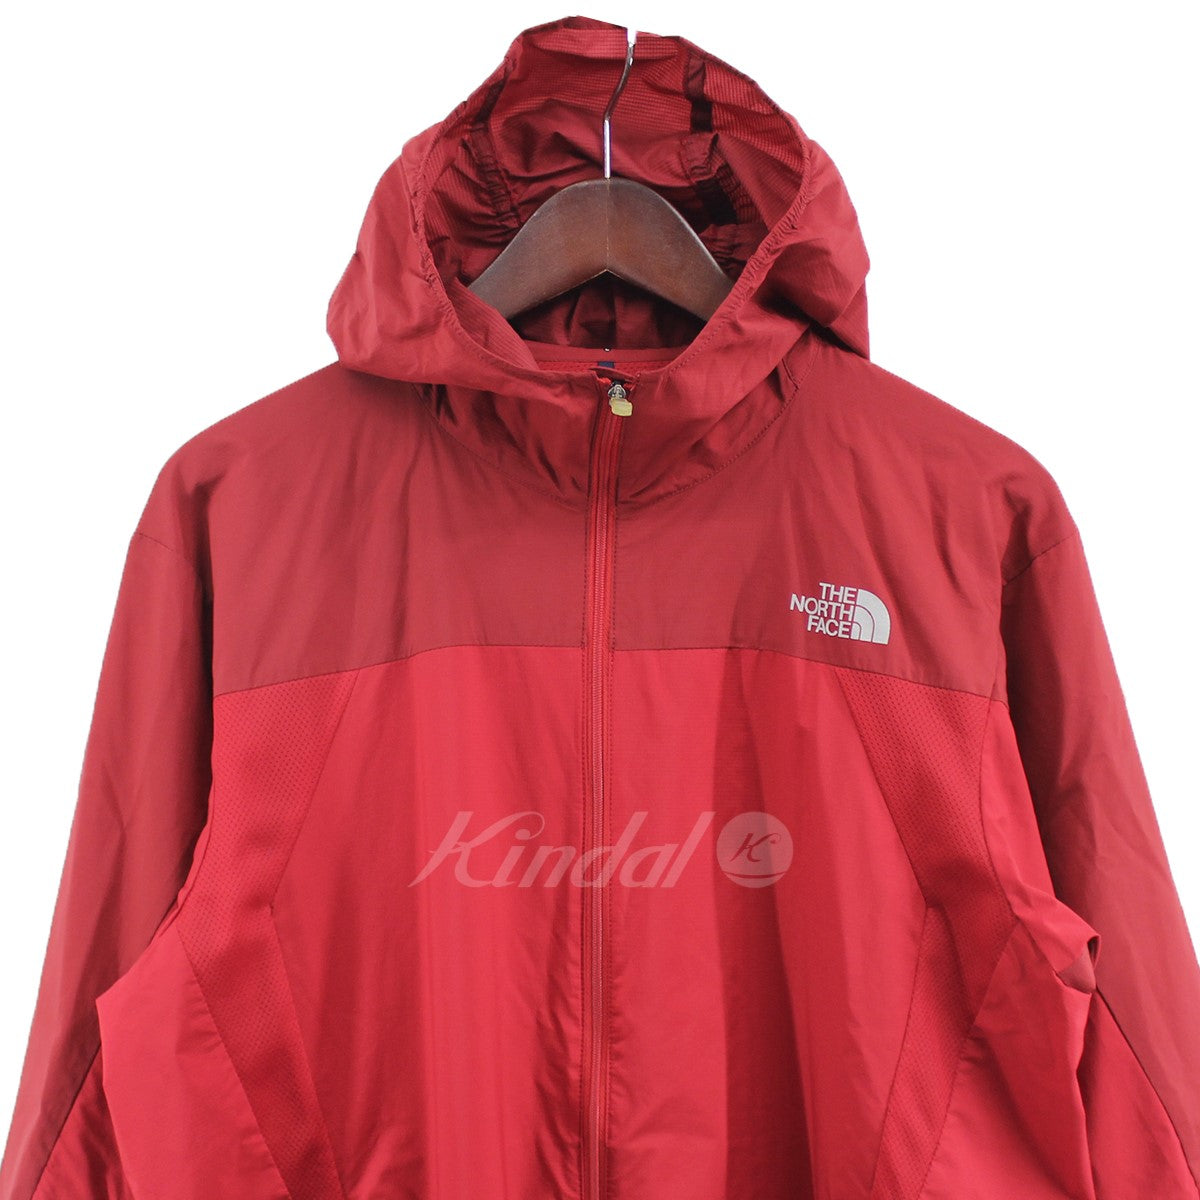 THE NORTH FACE(ザノースフェイス) Swallowtail Vent Hoodie スワロー 